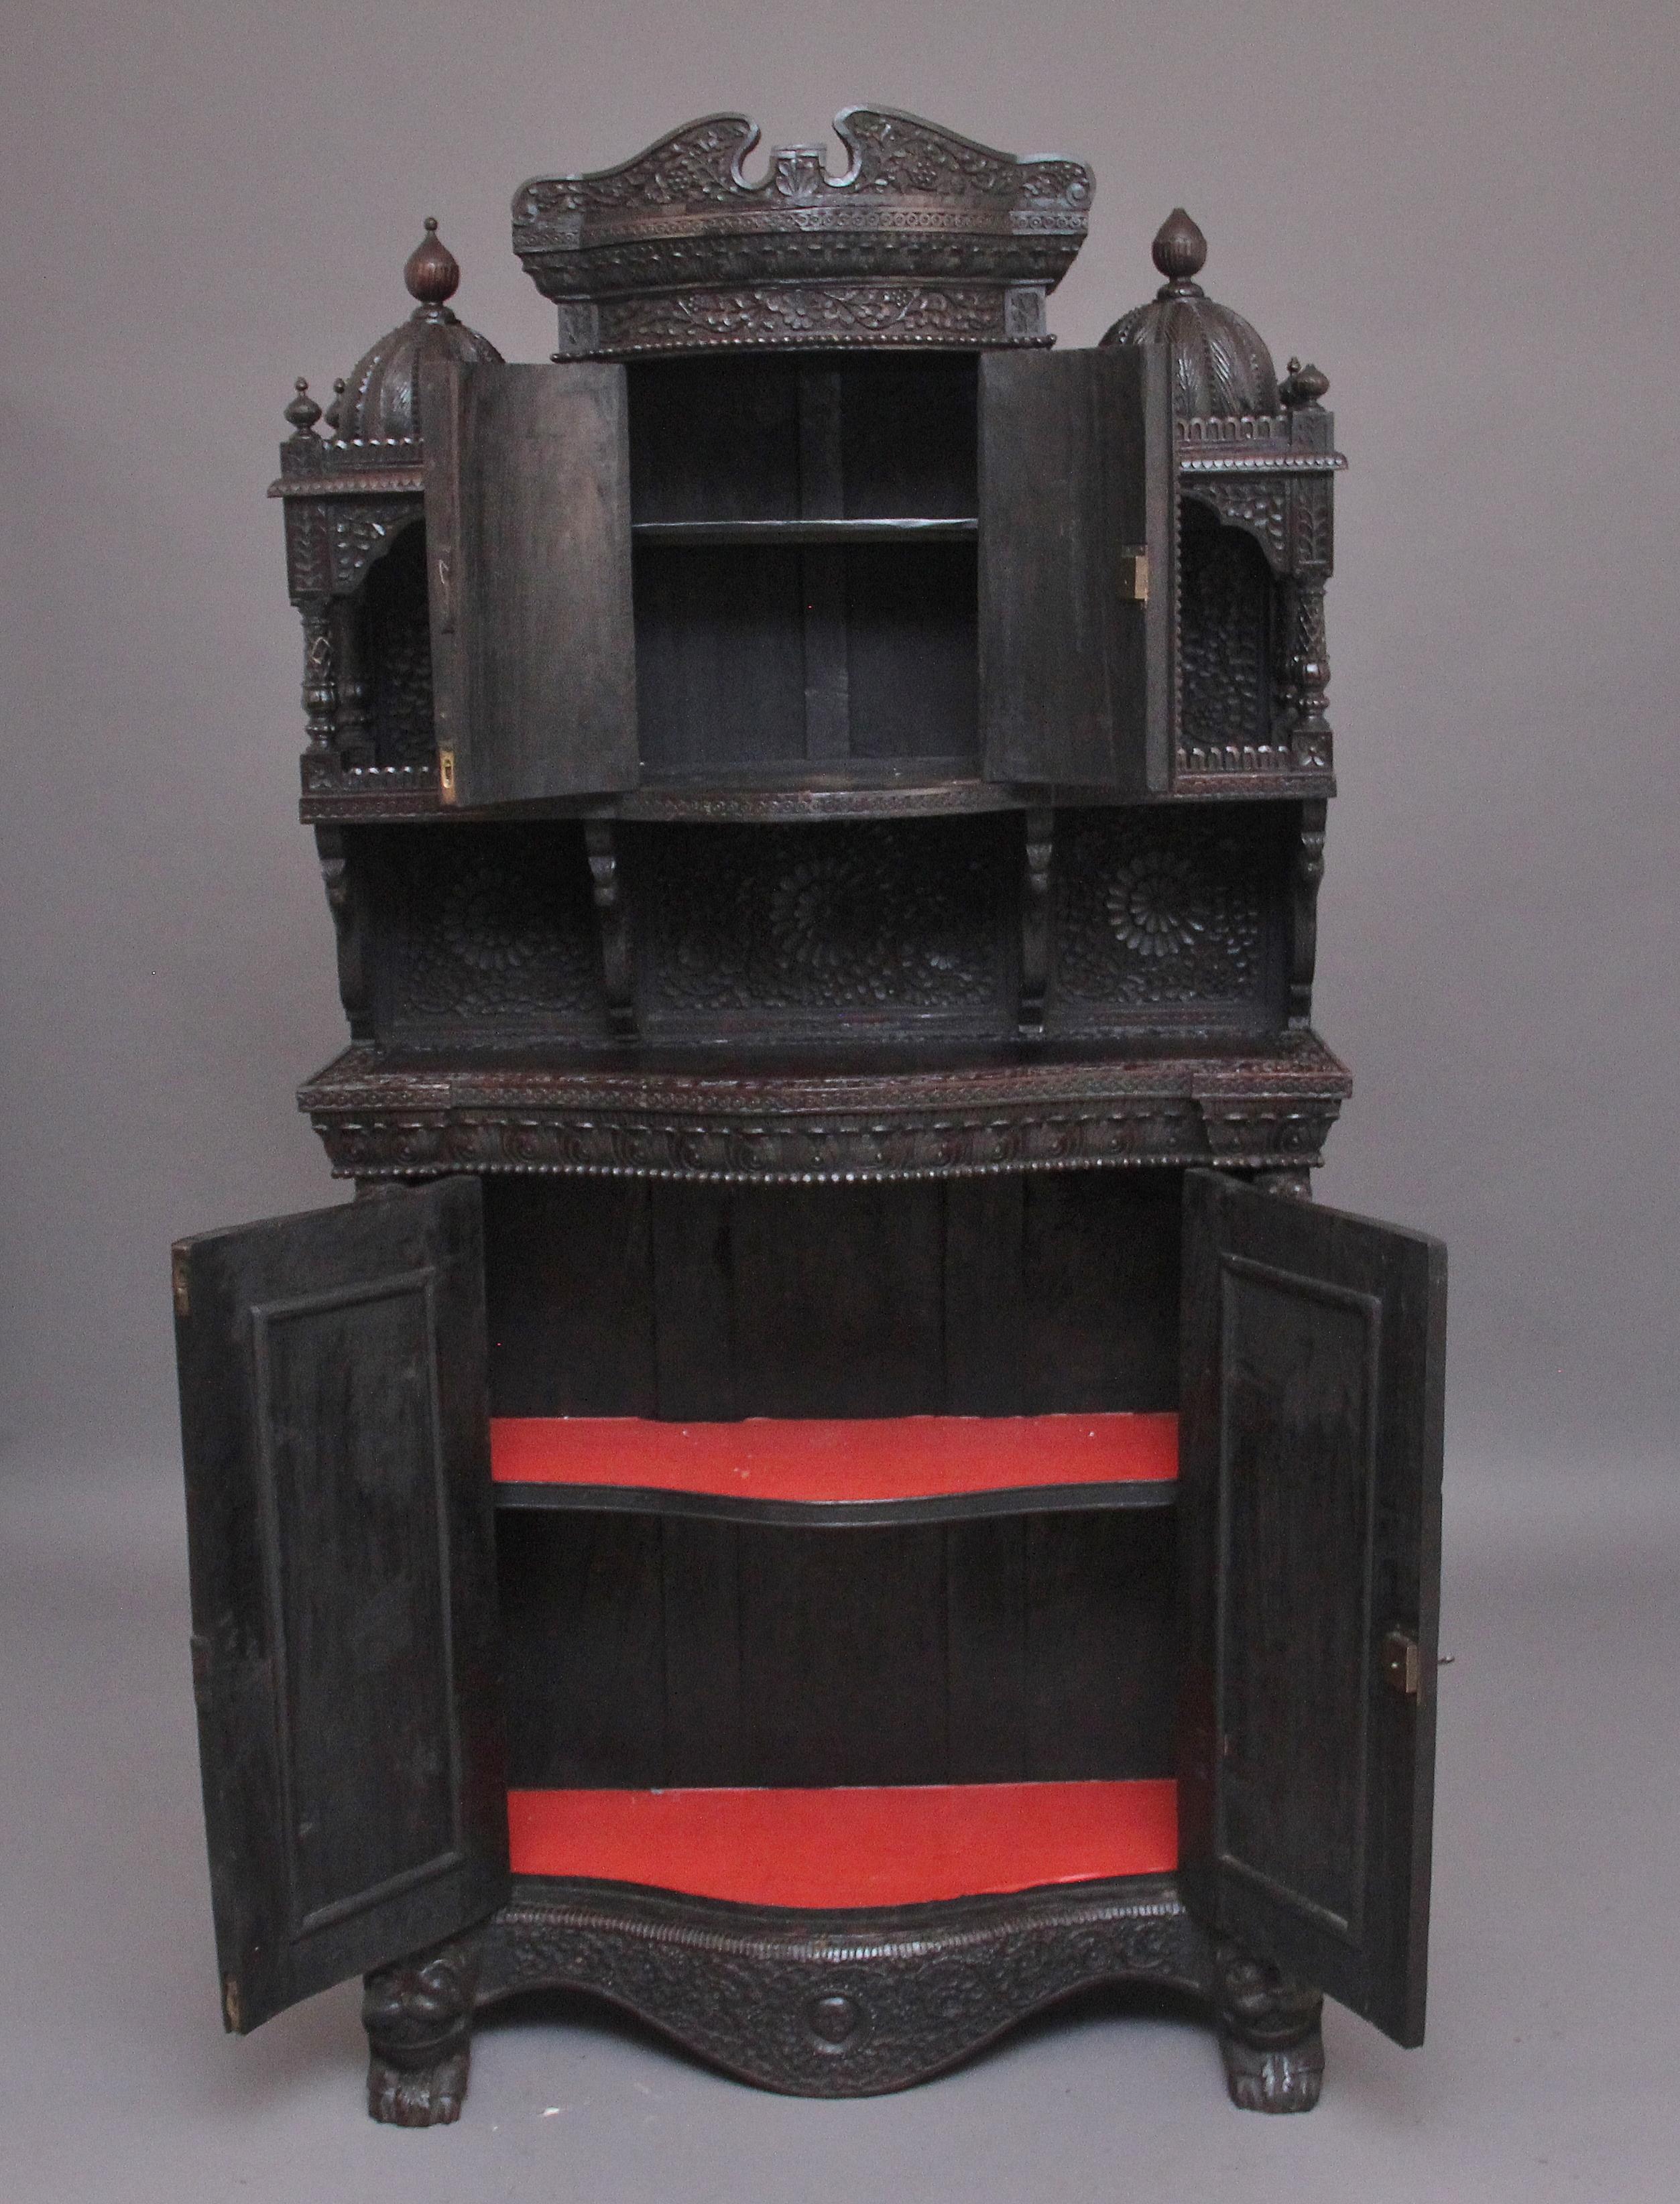 A superb quality mid 19th century carved Anglo - Indian cabinet influenced by Brighton pavilion, the shaped arched pediment above a two door cupboard opening to reveal a single fixed shelf inside, a shelf either side with decorative loose bold